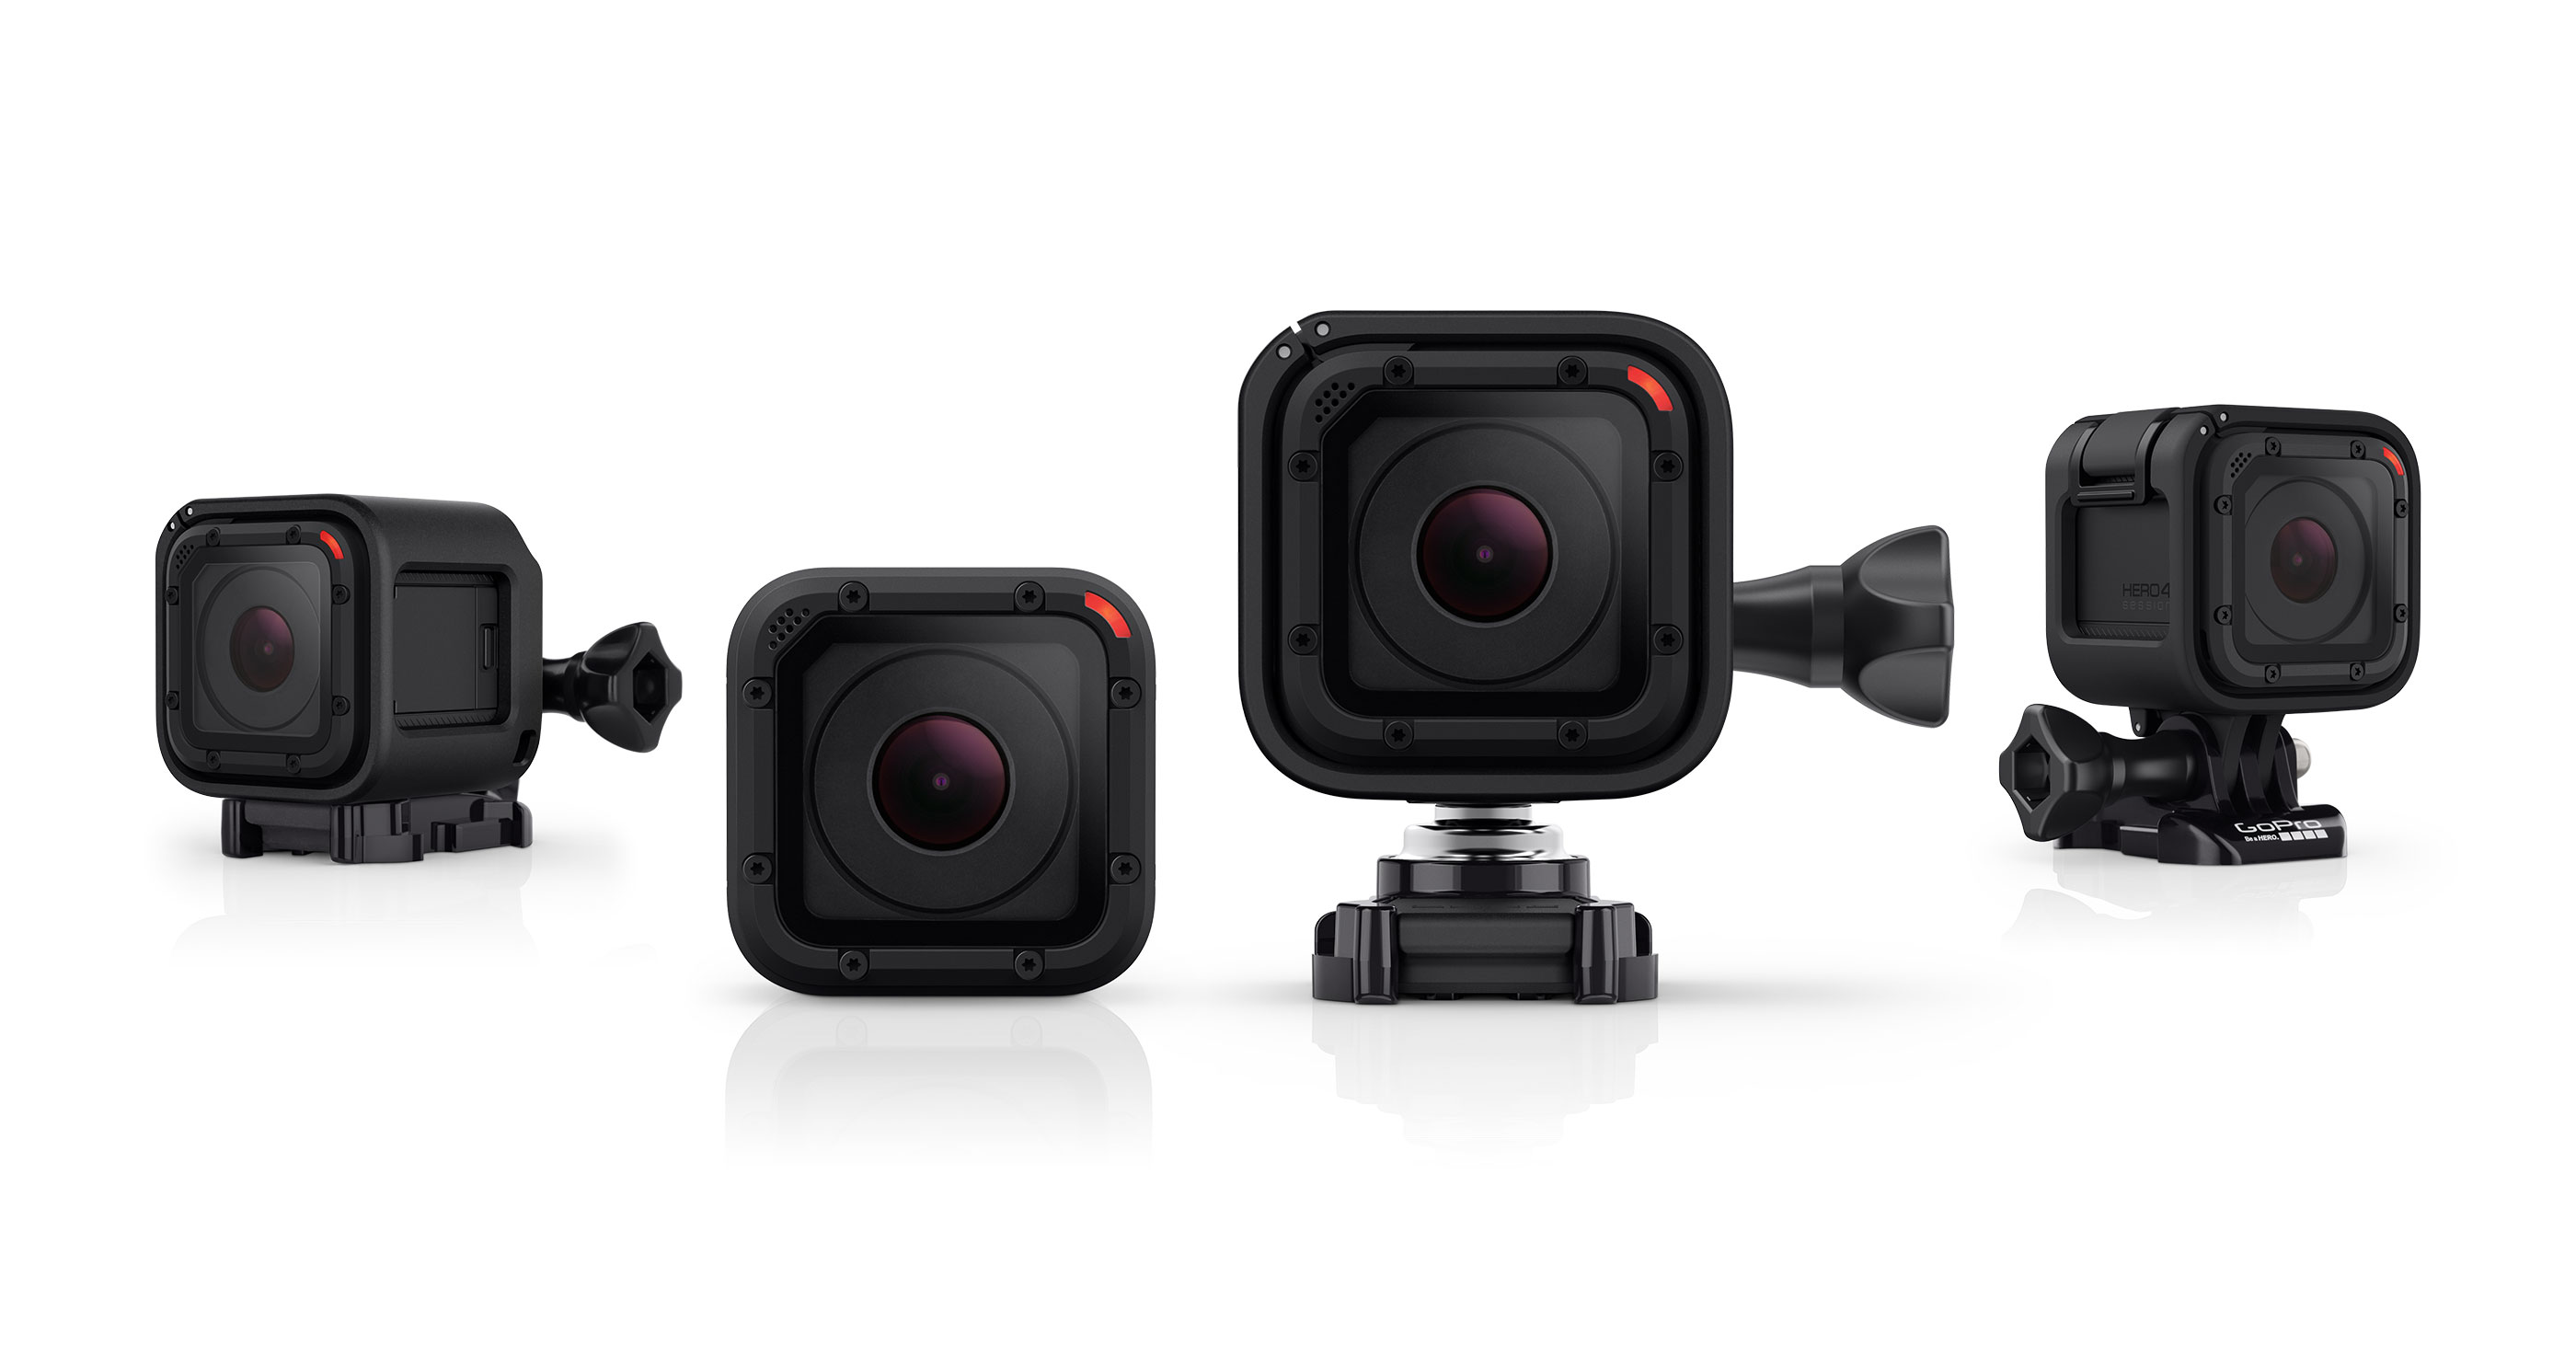 Wearables Wednesday: GoPro Hero 4 Session wearable actioncam